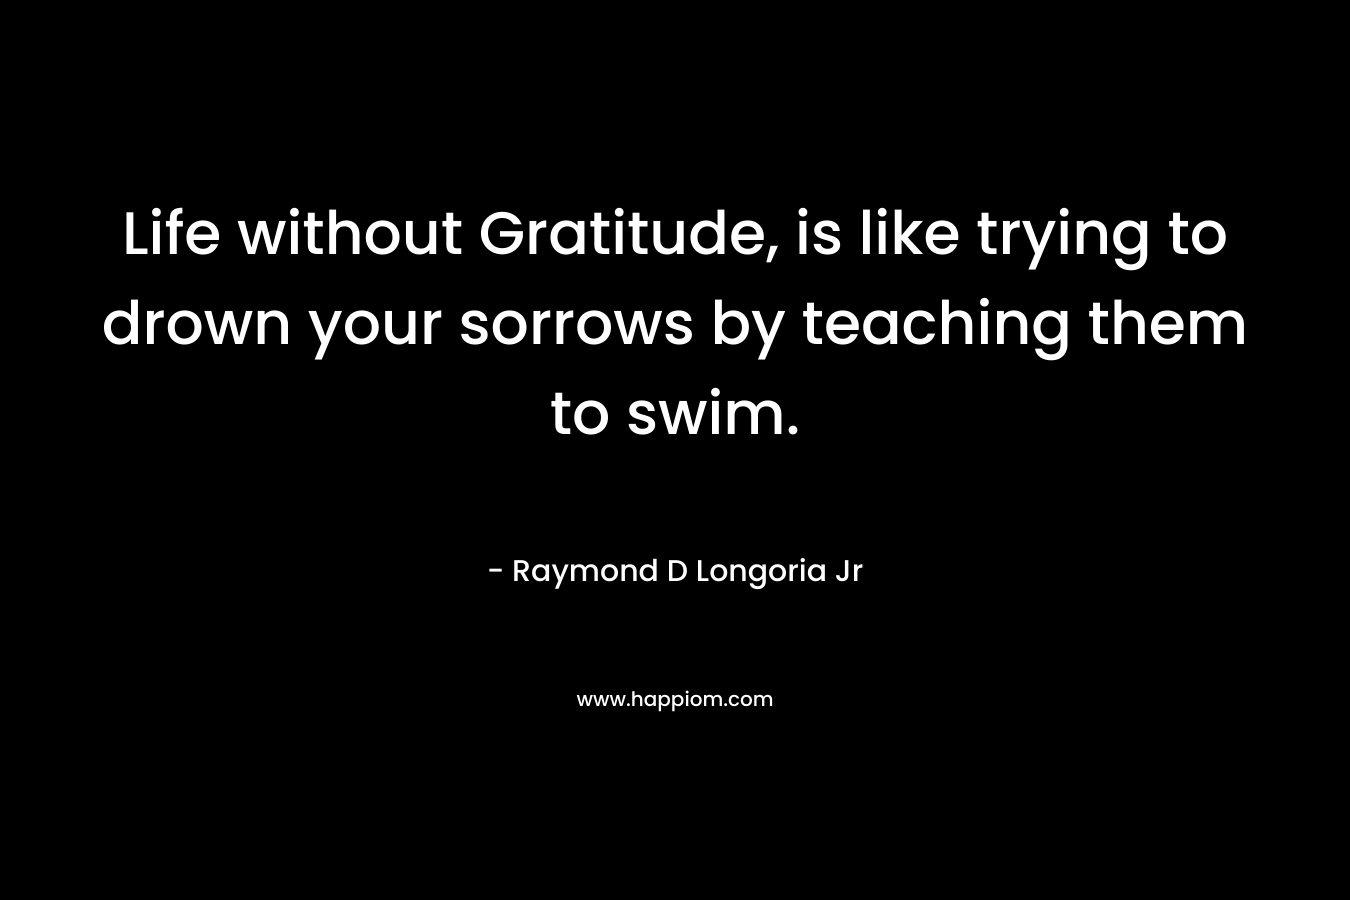 Life without Gratitude, is like trying to drown your sorrows by teaching them to swim. – Raymond D Longoria Jr